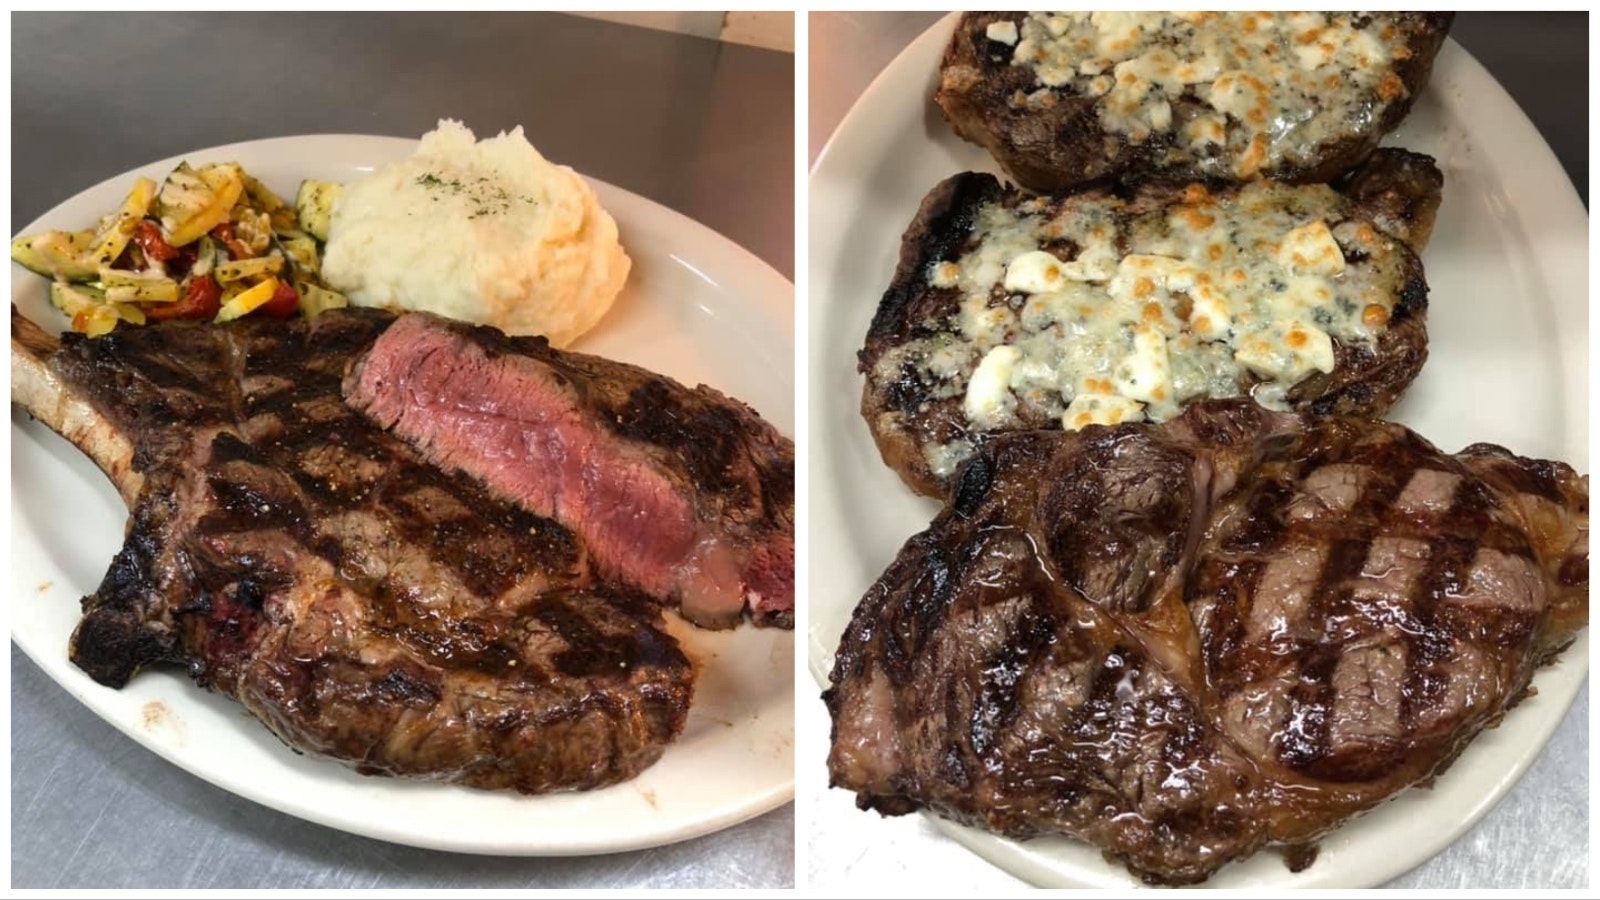 The steaks at Miners and Stockmen's Steakhouse and Spirits in Hartville, Wyoming, rival any high-end steakhouse in the country.